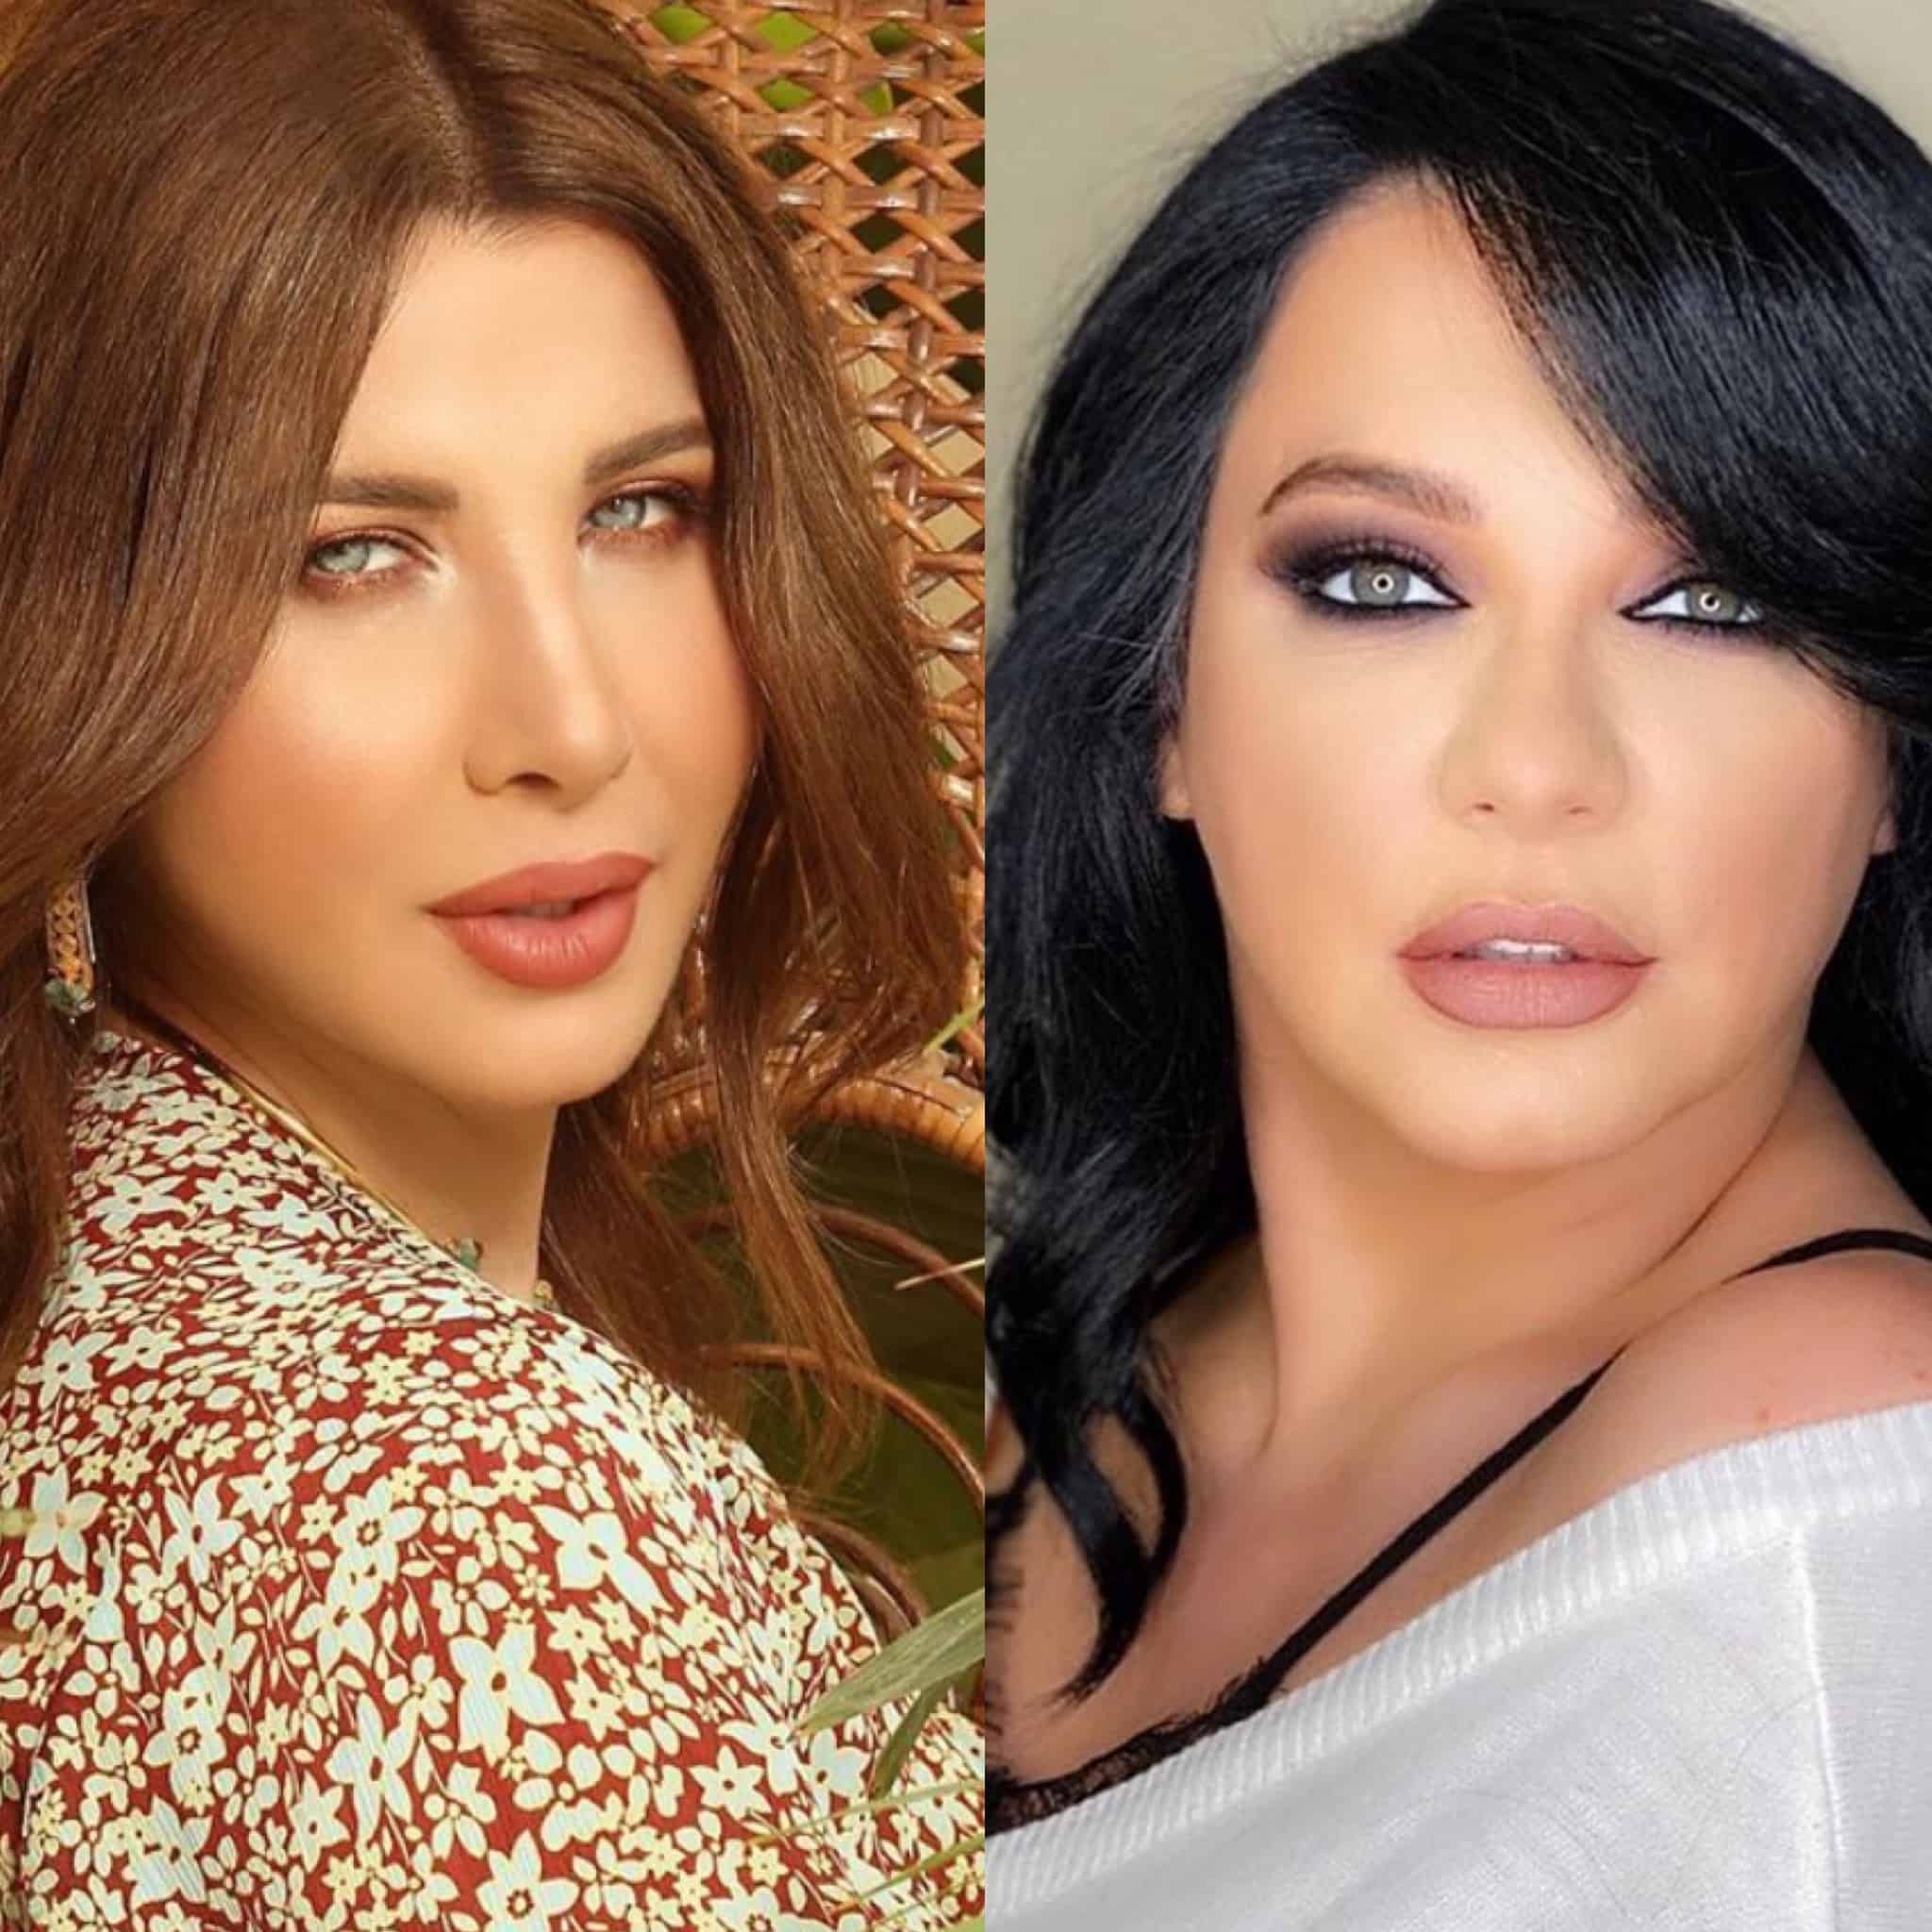 Solaf Fawakherji declares in the case of Nancy Ajram: I am with the oppressed